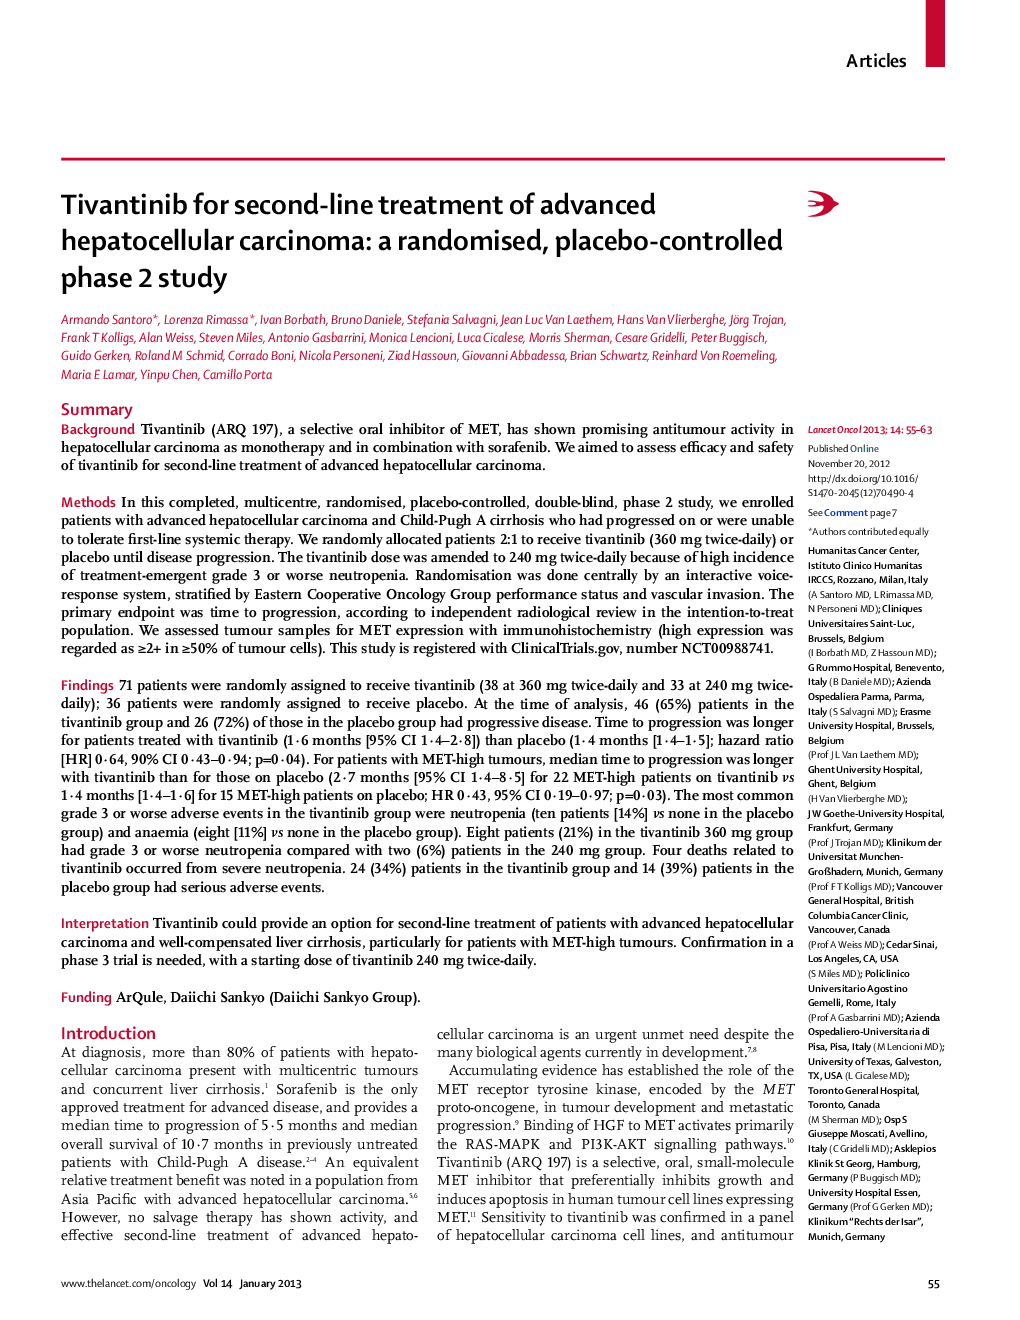 Tivantinib for second-line treatment of advanced hepatocellular carcinoma: a randomised, placebo-controlled phase 2 study